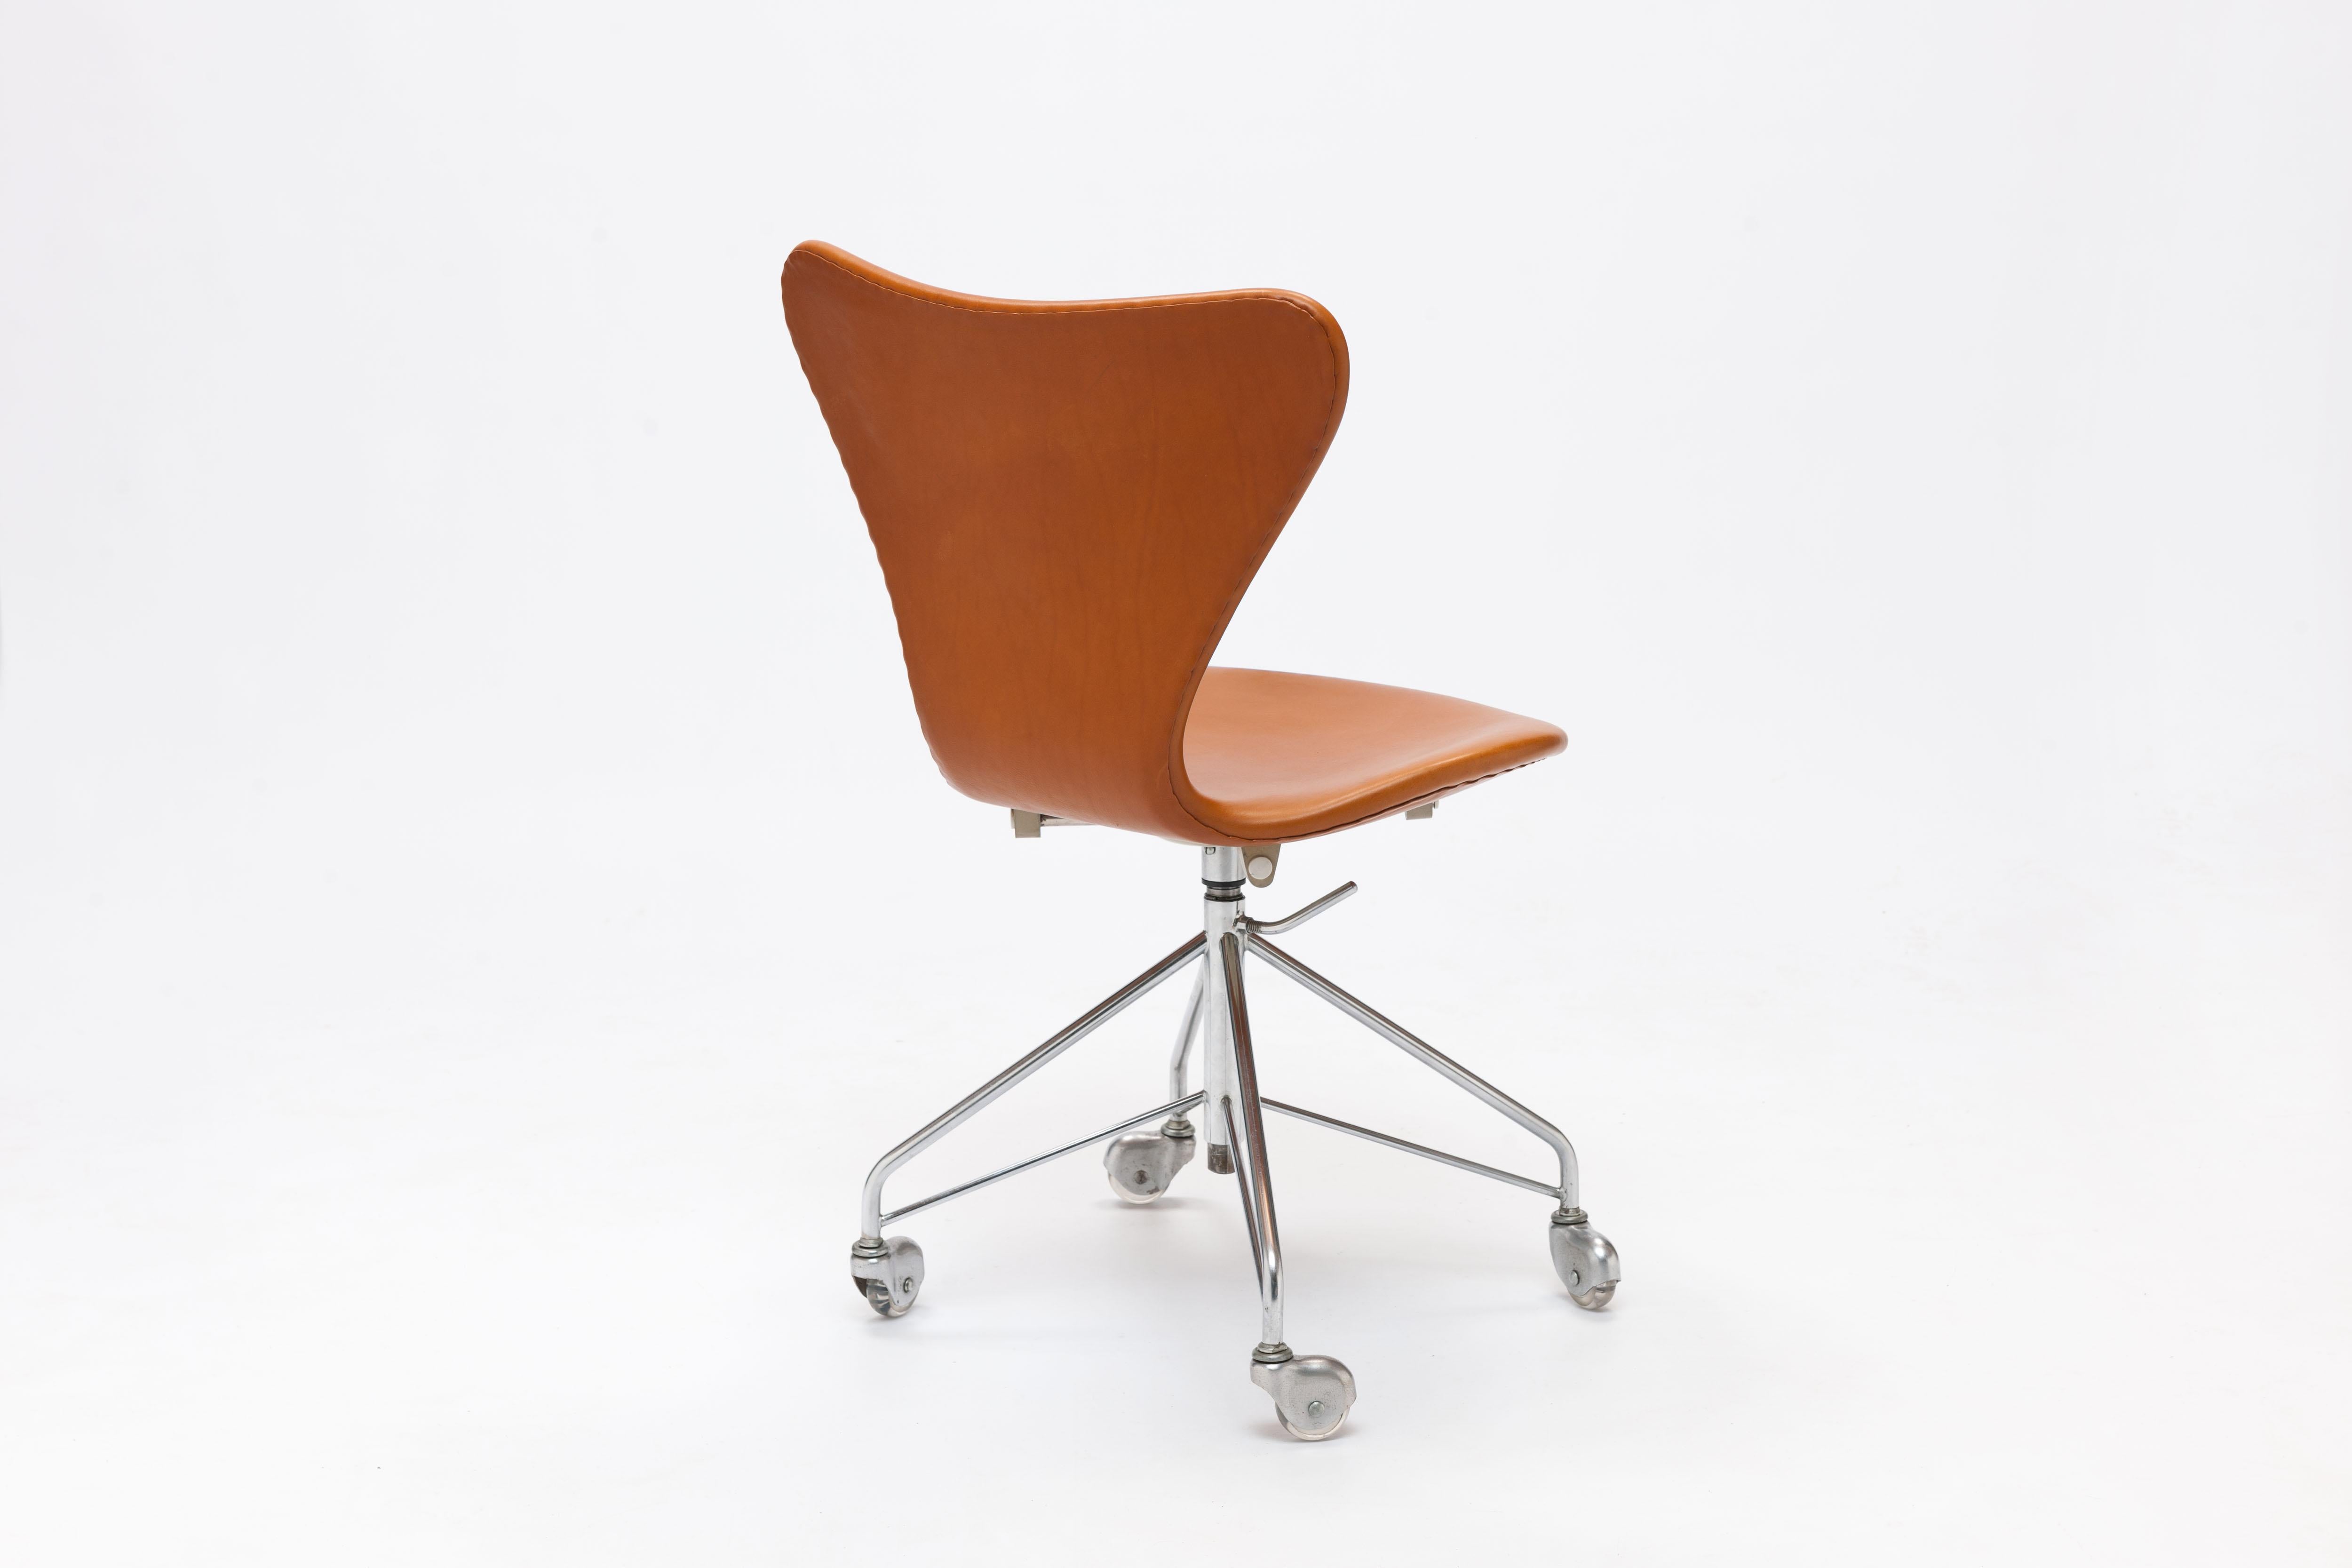 Arne Jacobsen swivel desk chair model 3117 office chair. Original, first series four-star swivel base with chromed steel feet on casters. Designed by Arne Jacobsen in 1955.

The chair has a new handstitched upholstery exactly like the original. This